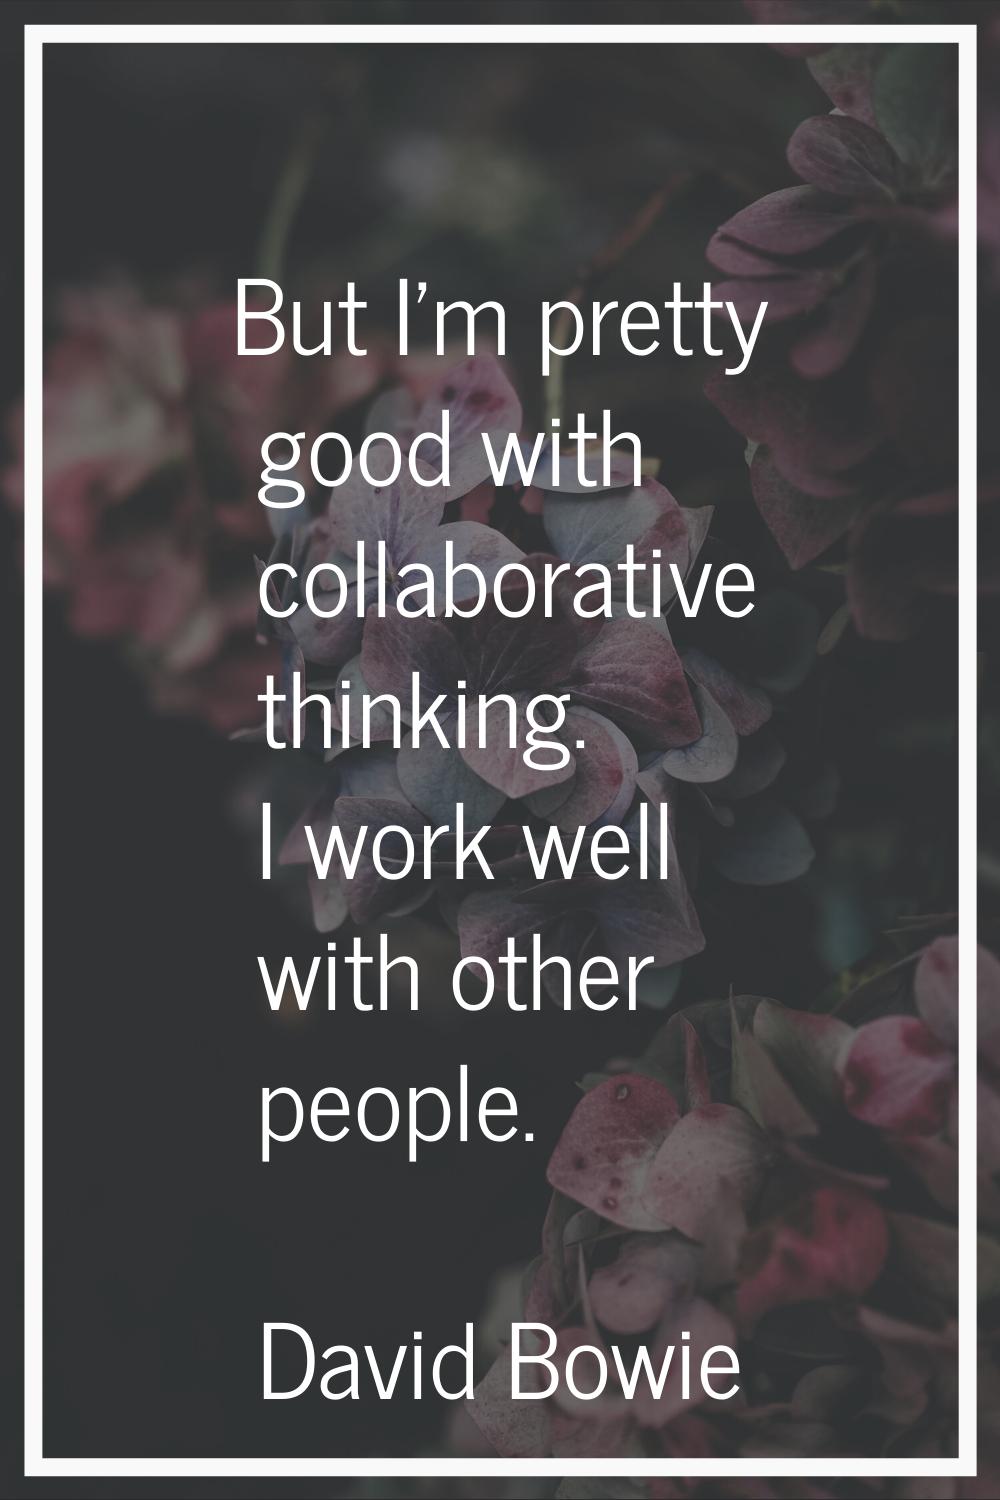 But I'm pretty good with collaborative thinking. I work well with other people.